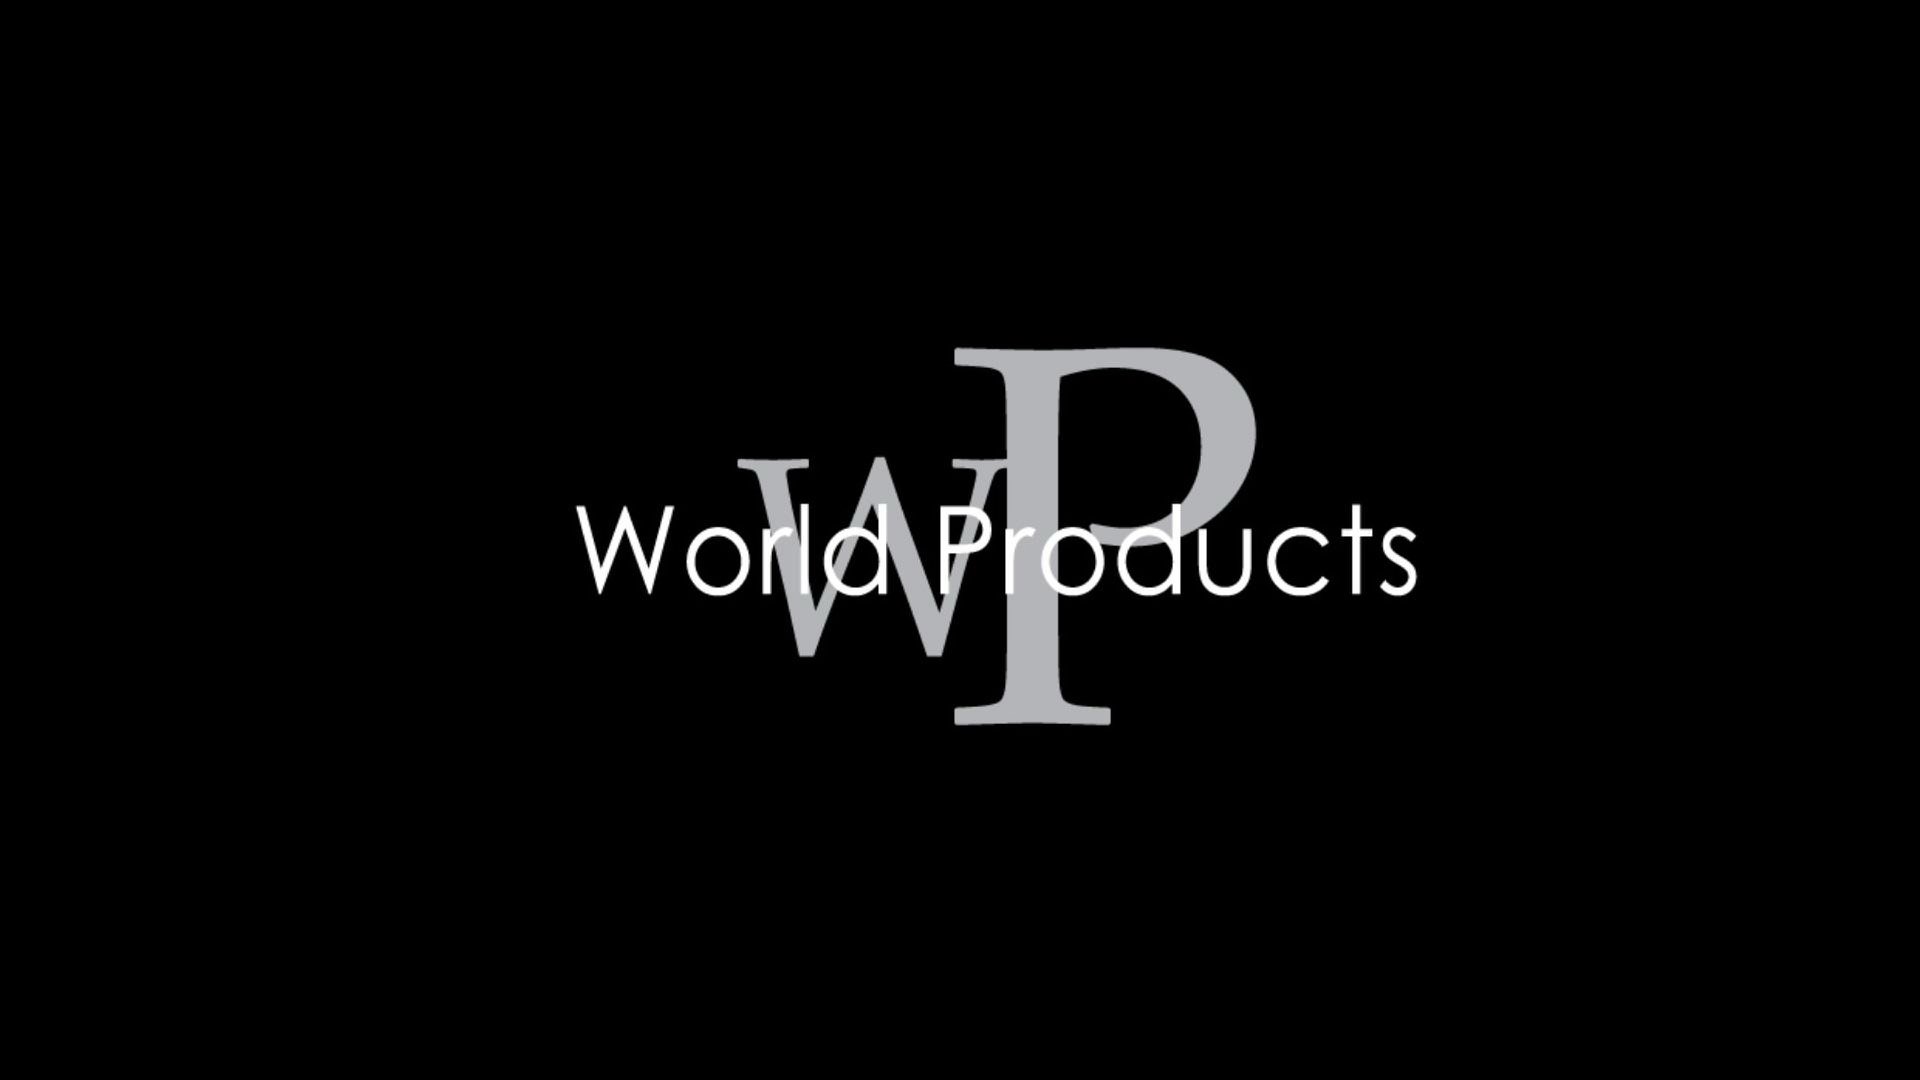  WORLD PRODUCTS